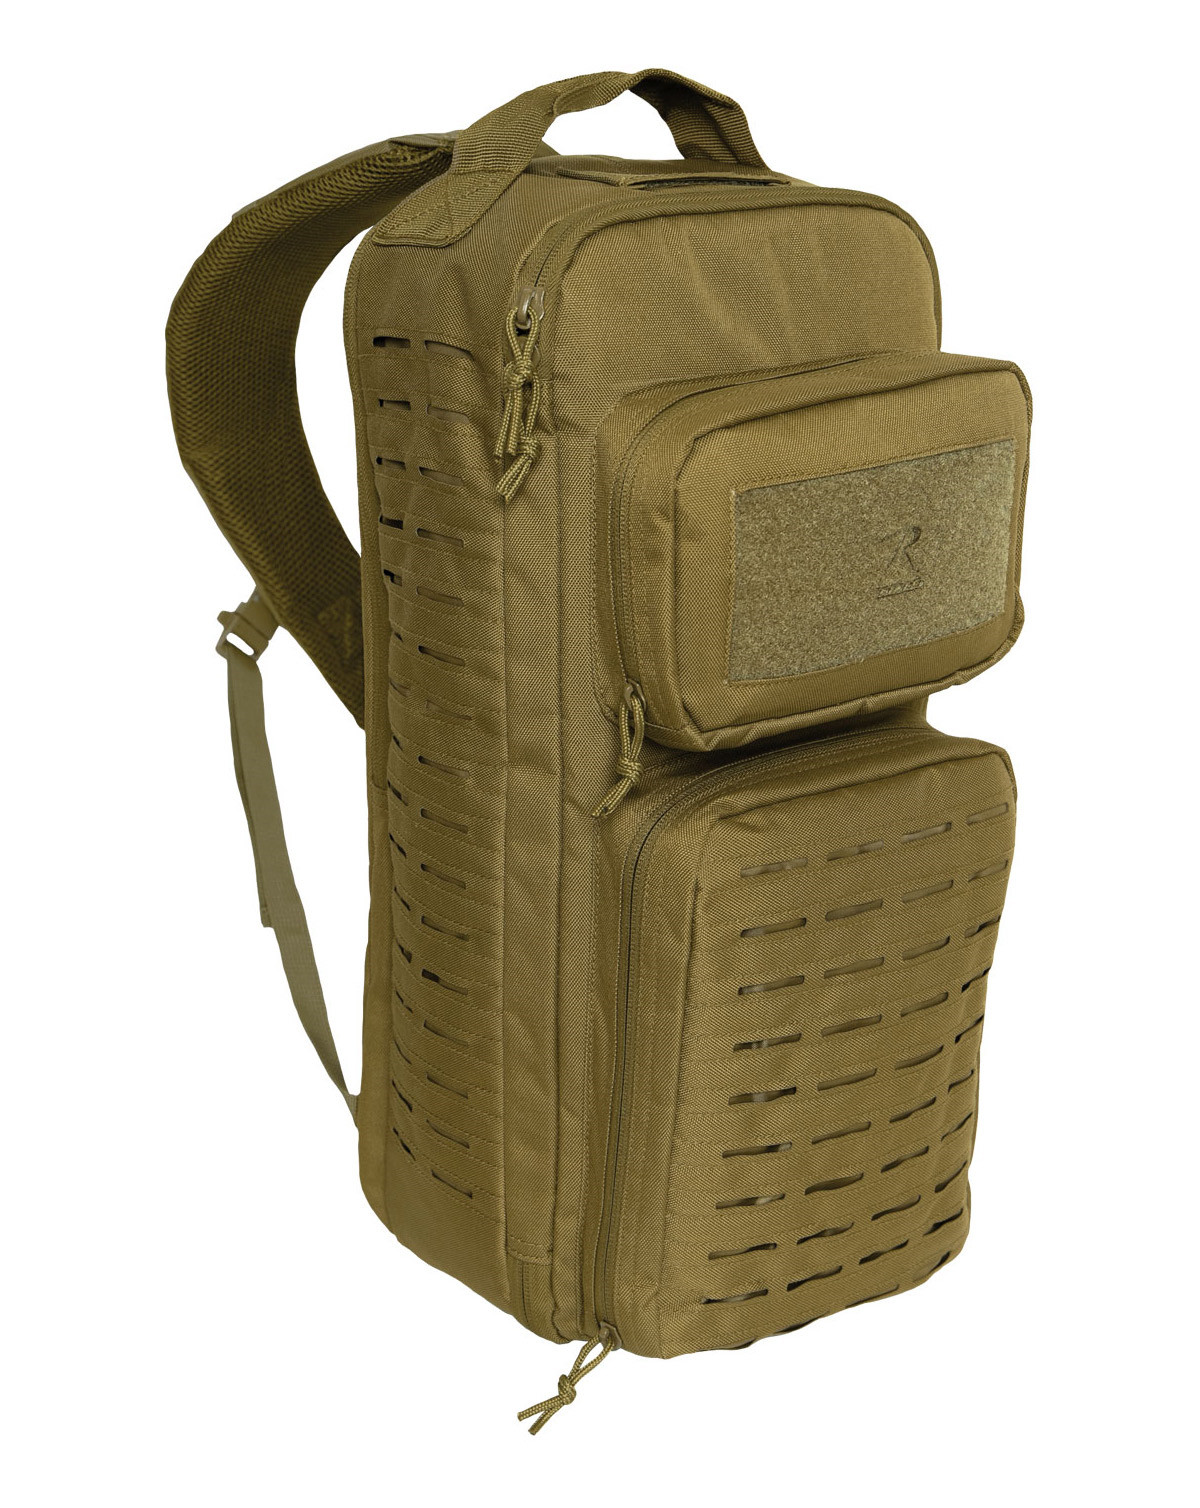 Rothco Tactical Single Sling Pack With Laser Cut Molle (Coyote Brun, One Size)